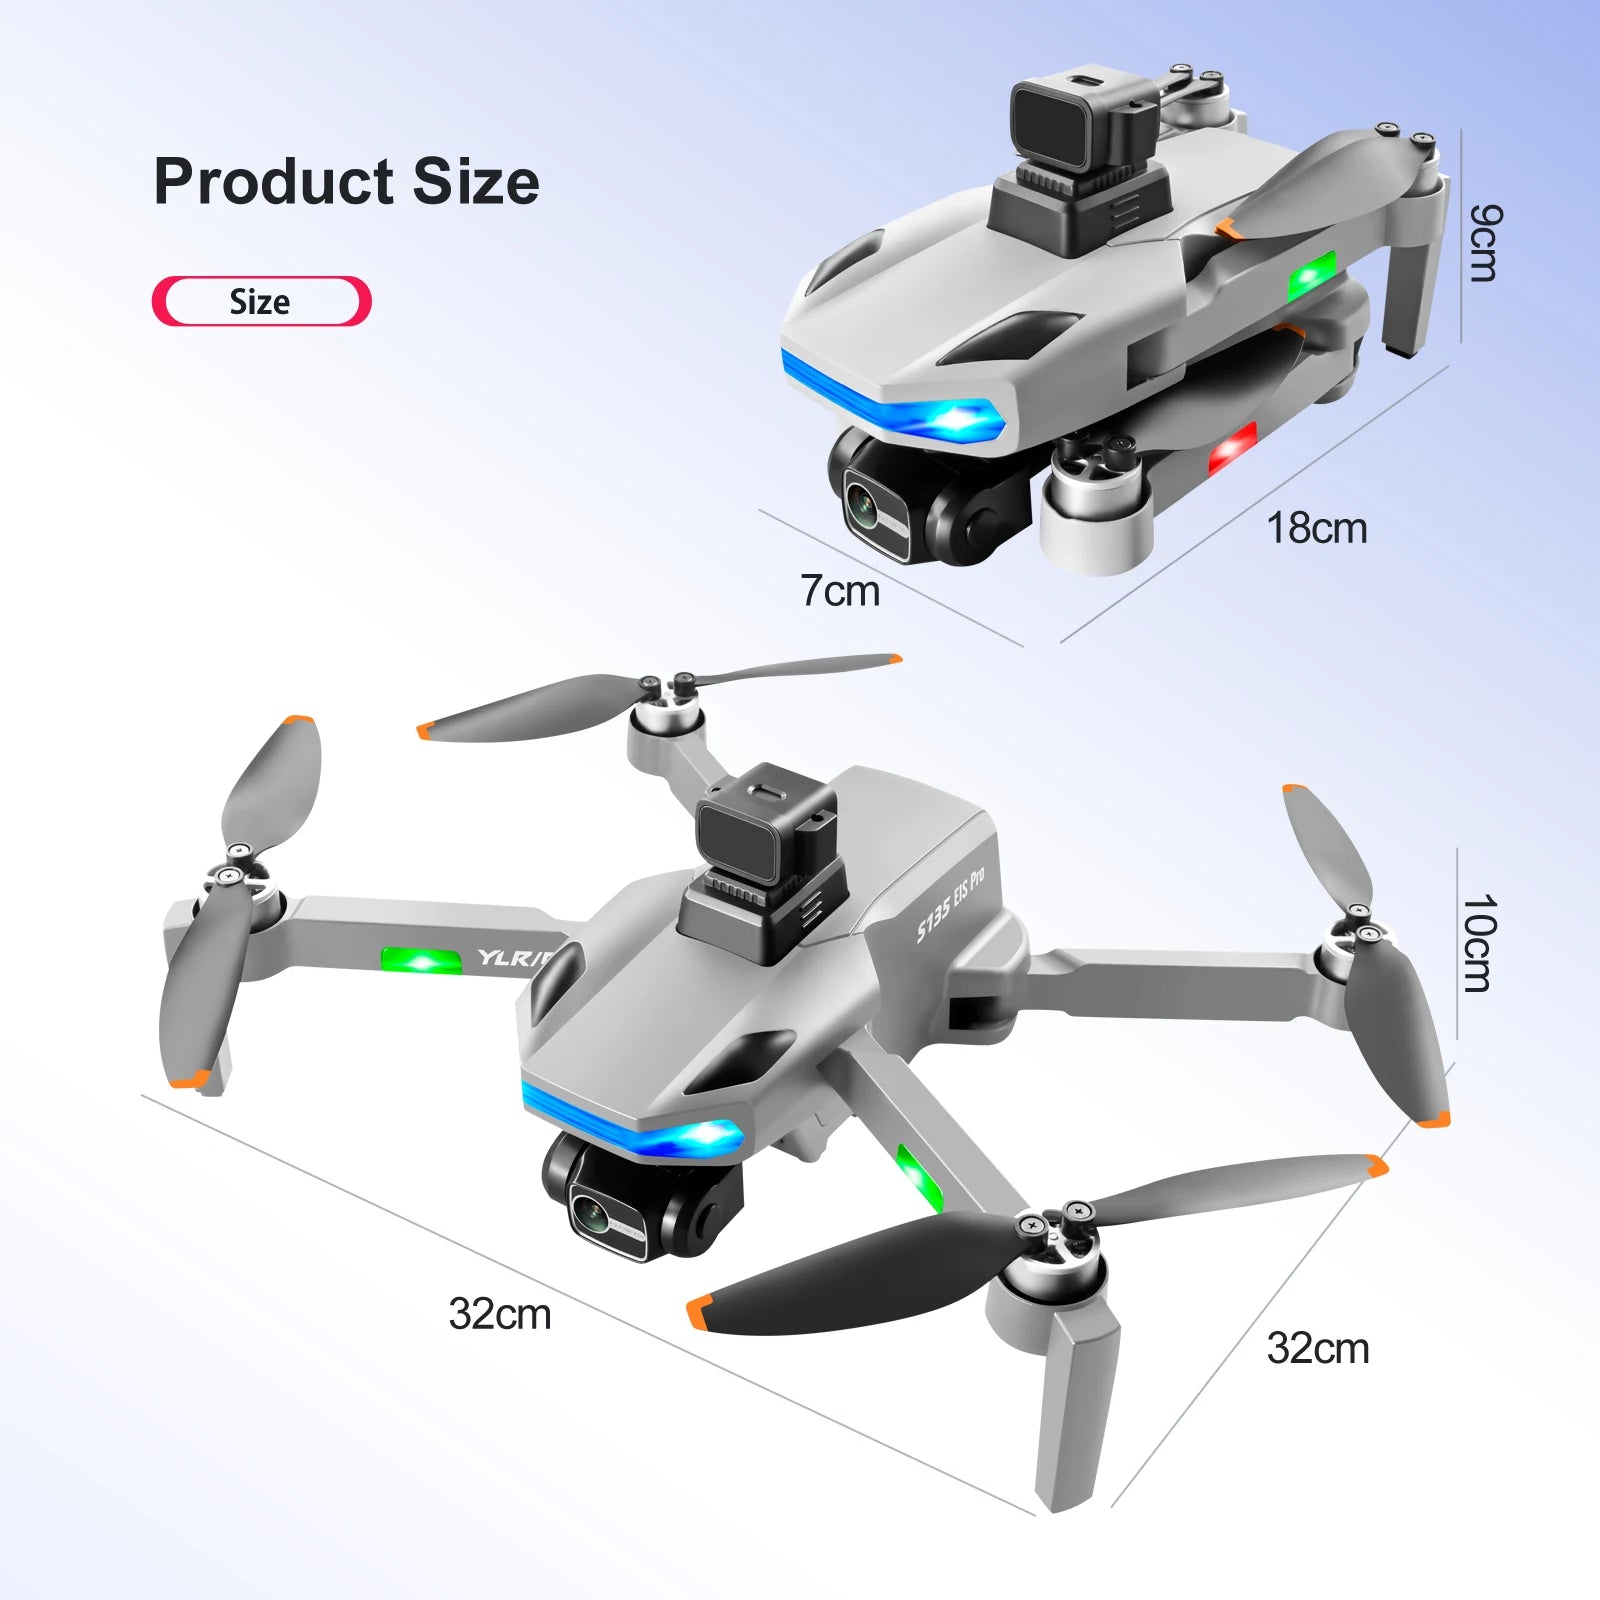 S135 Drone, the drone has a very stable hover flight and can take high-quality photos of the environment